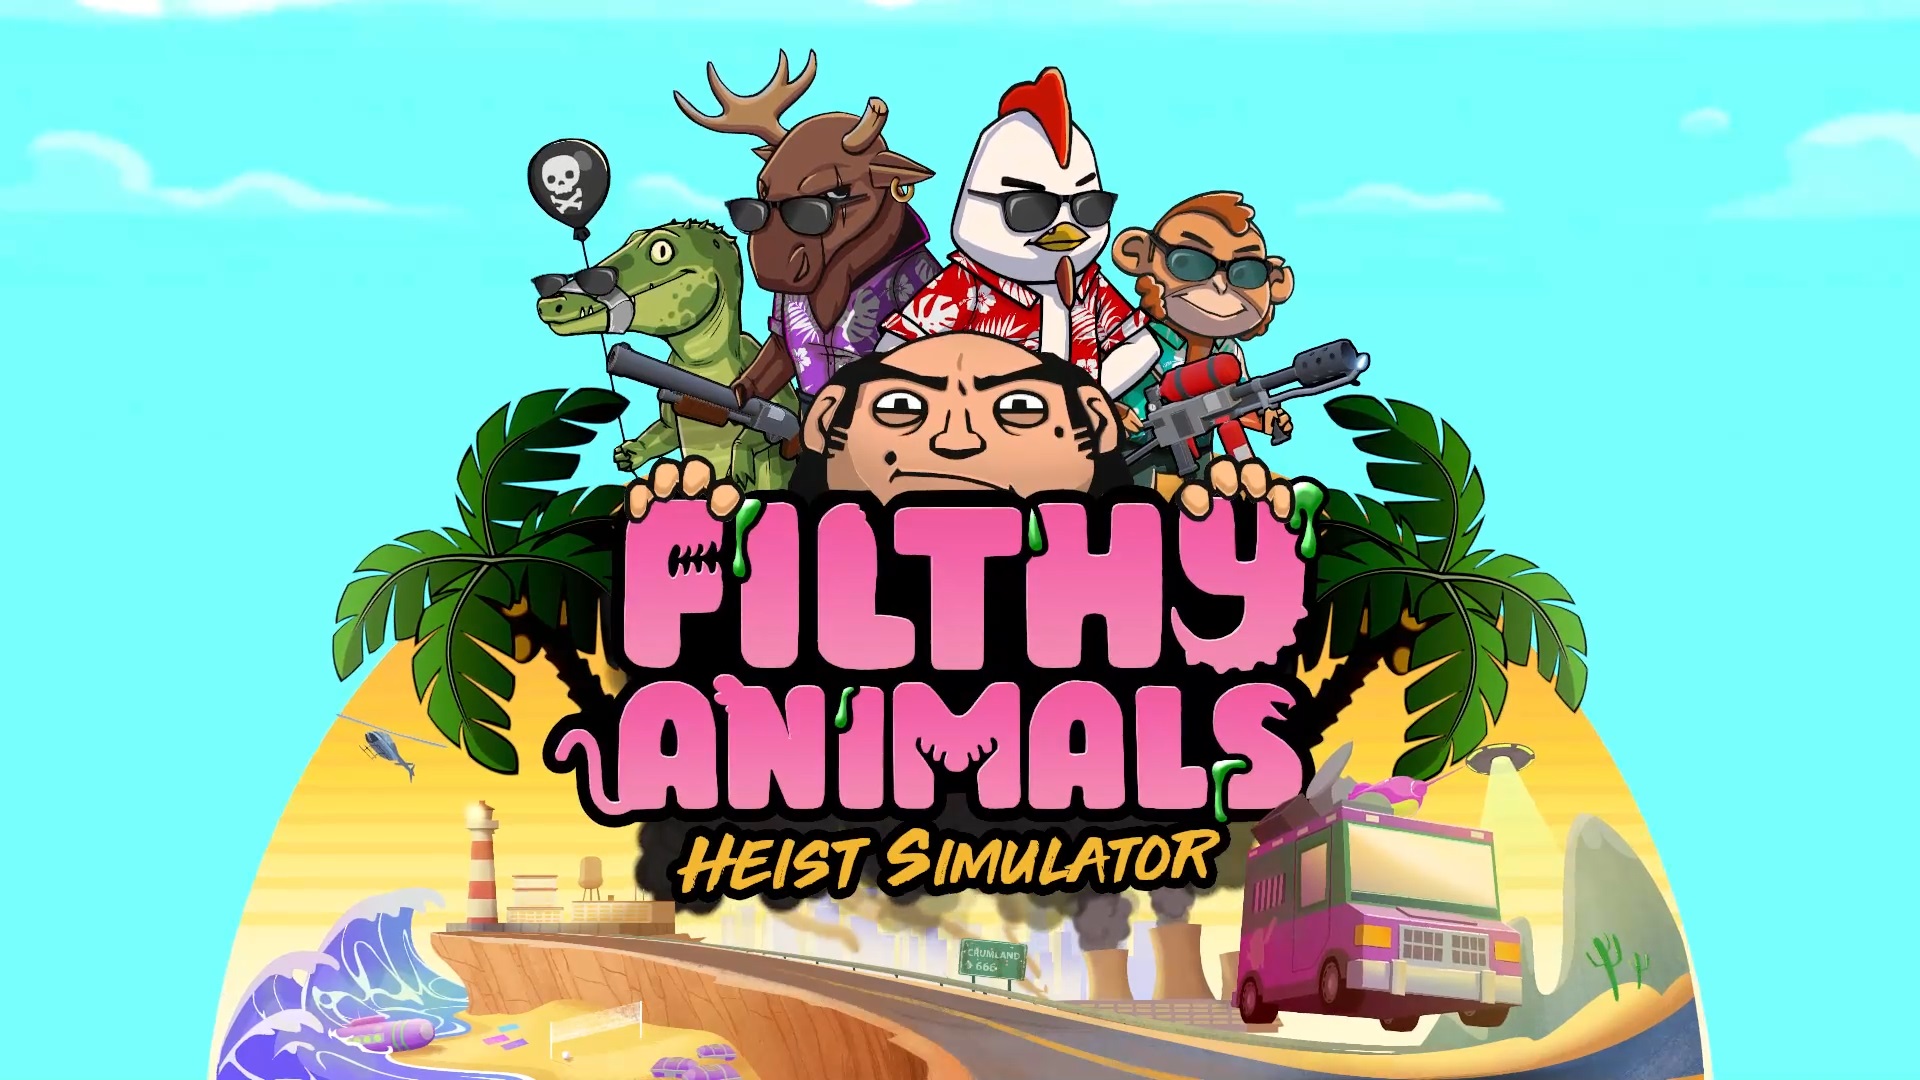 filthy-animals-heist-simulator-news-rumors-and-information-bleeding-cool-news-and-rumors-page-1